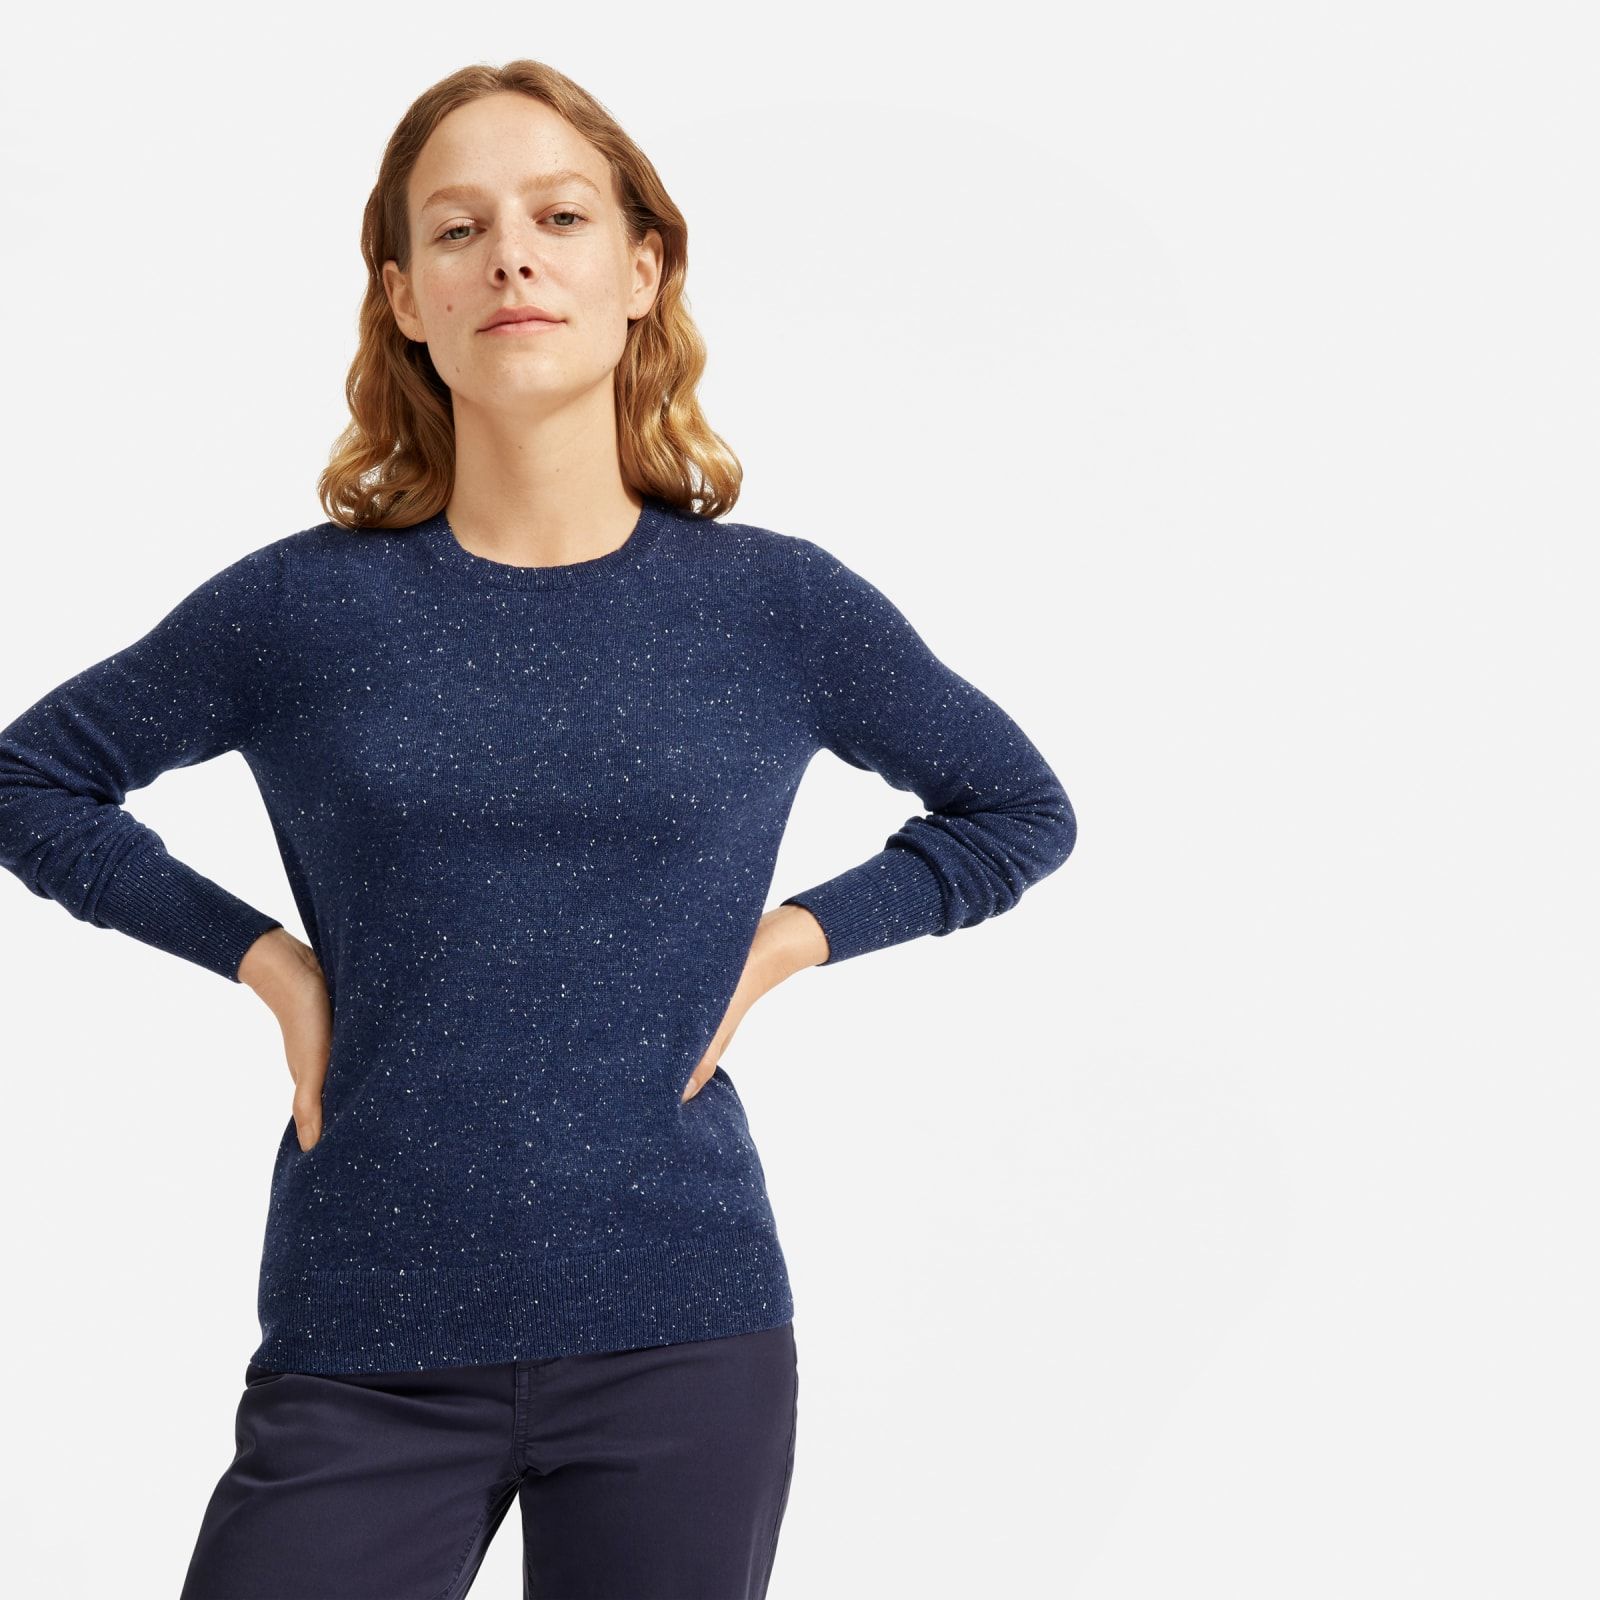 Women's Cashmere Crew Sweater by Everlane in Indigo Donegal, Size XS | Everlane